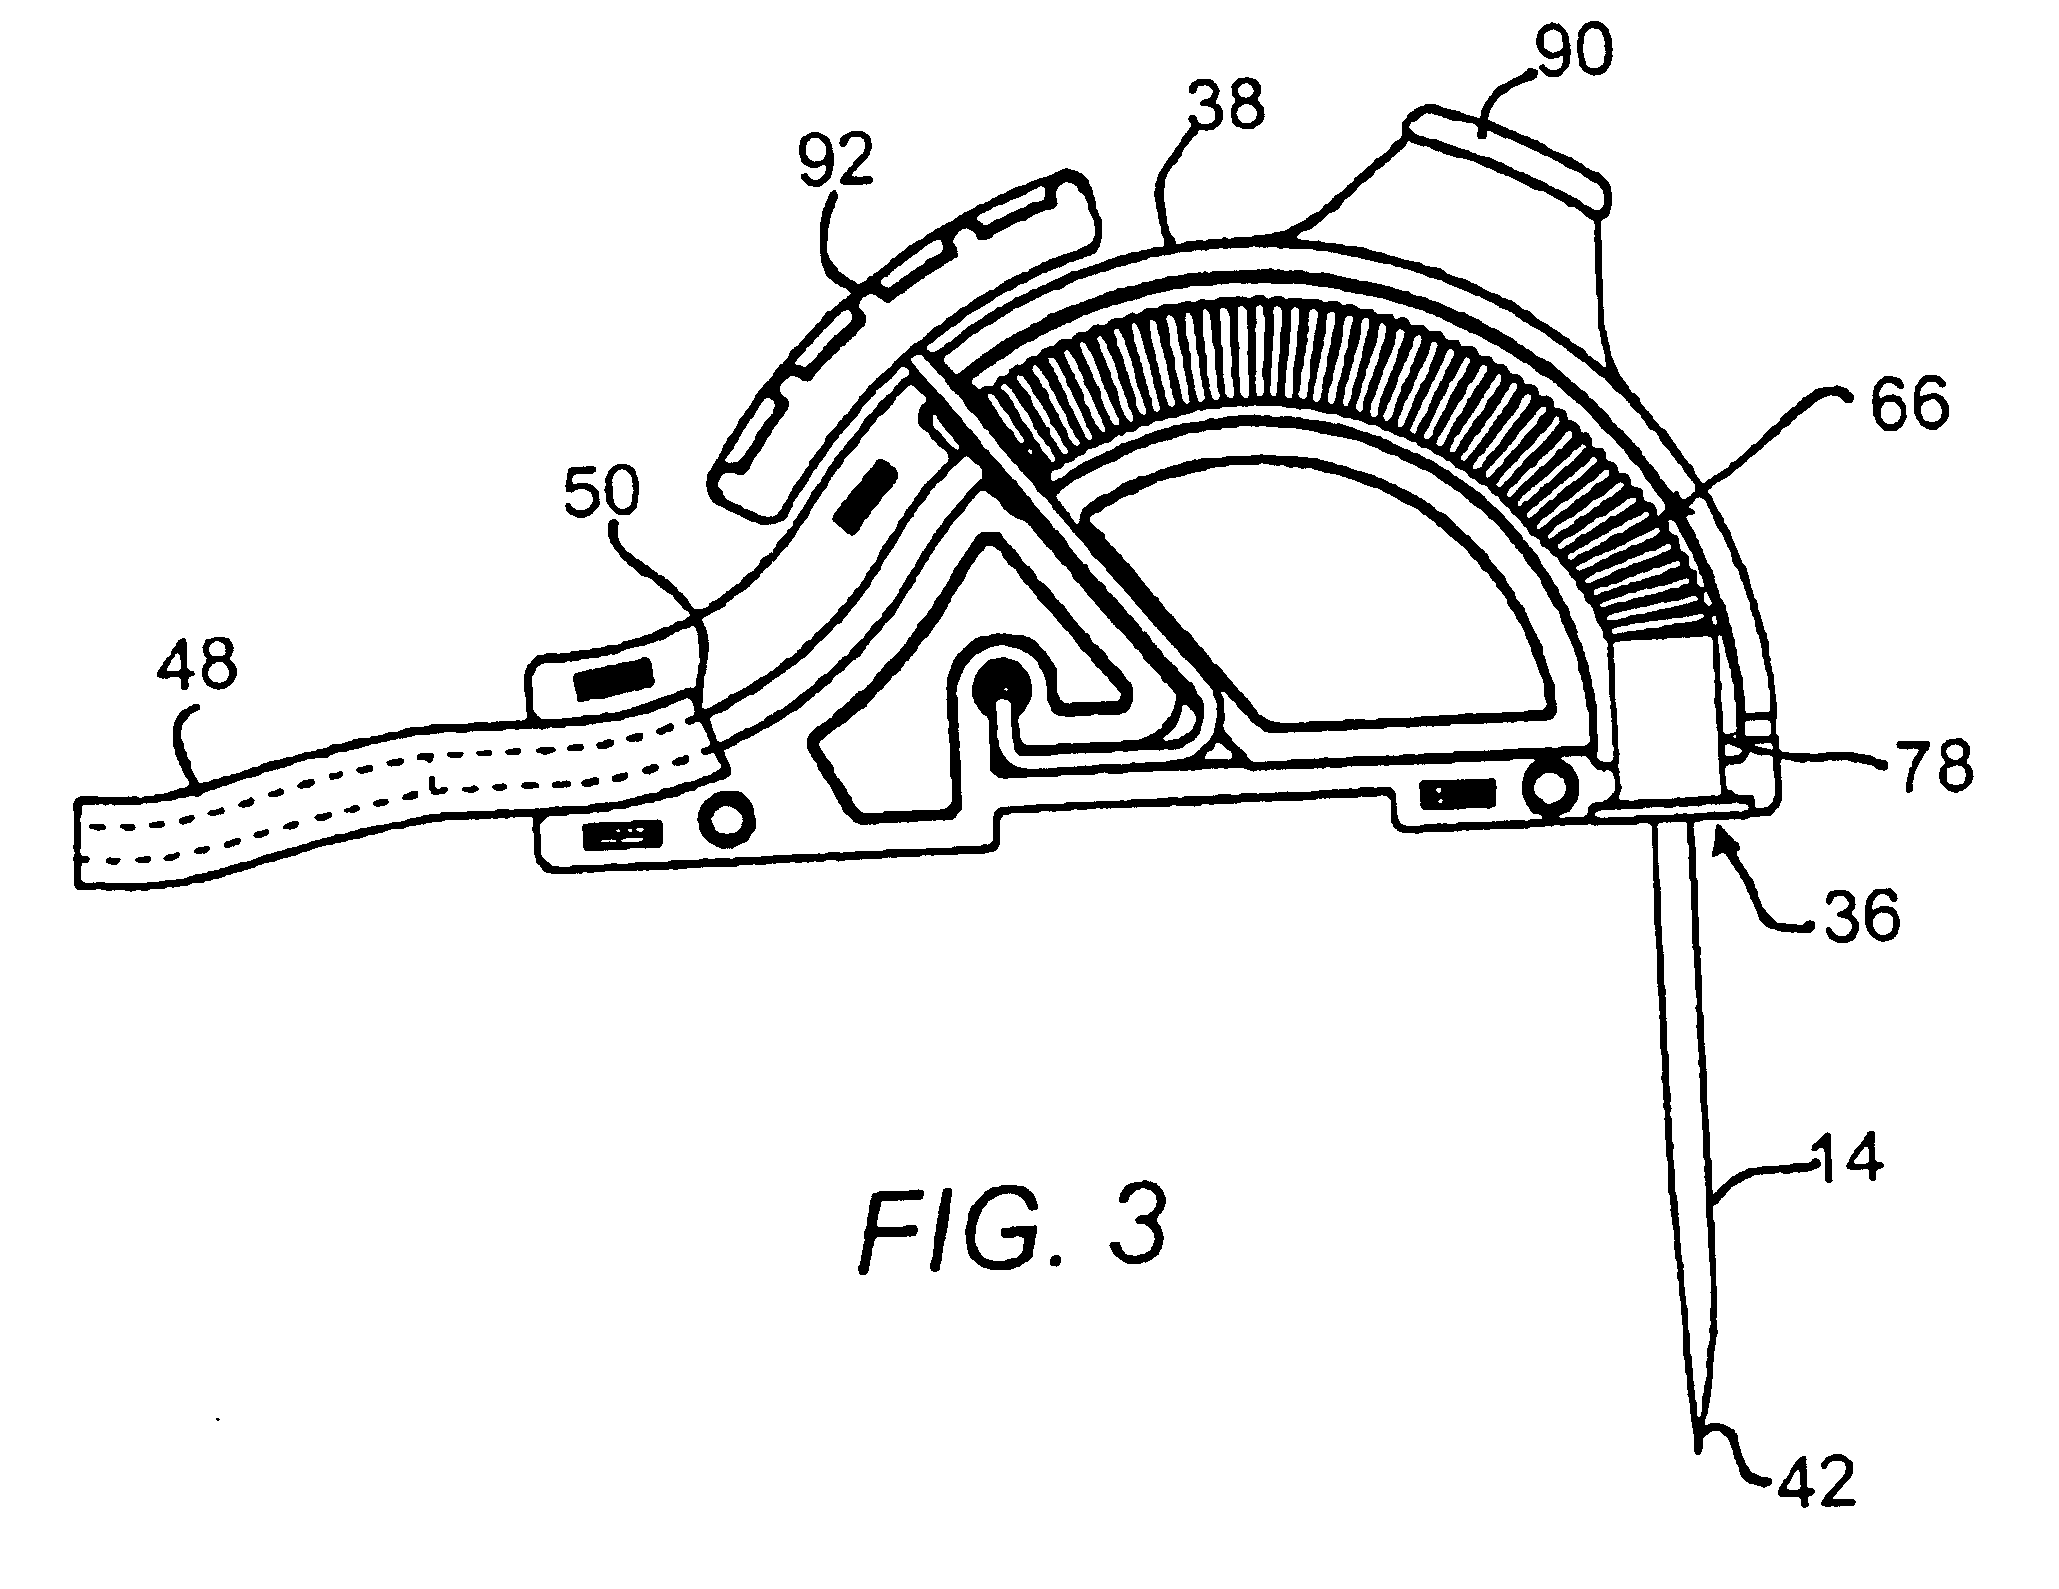 Huber needle with anti-rebound safety mechanism